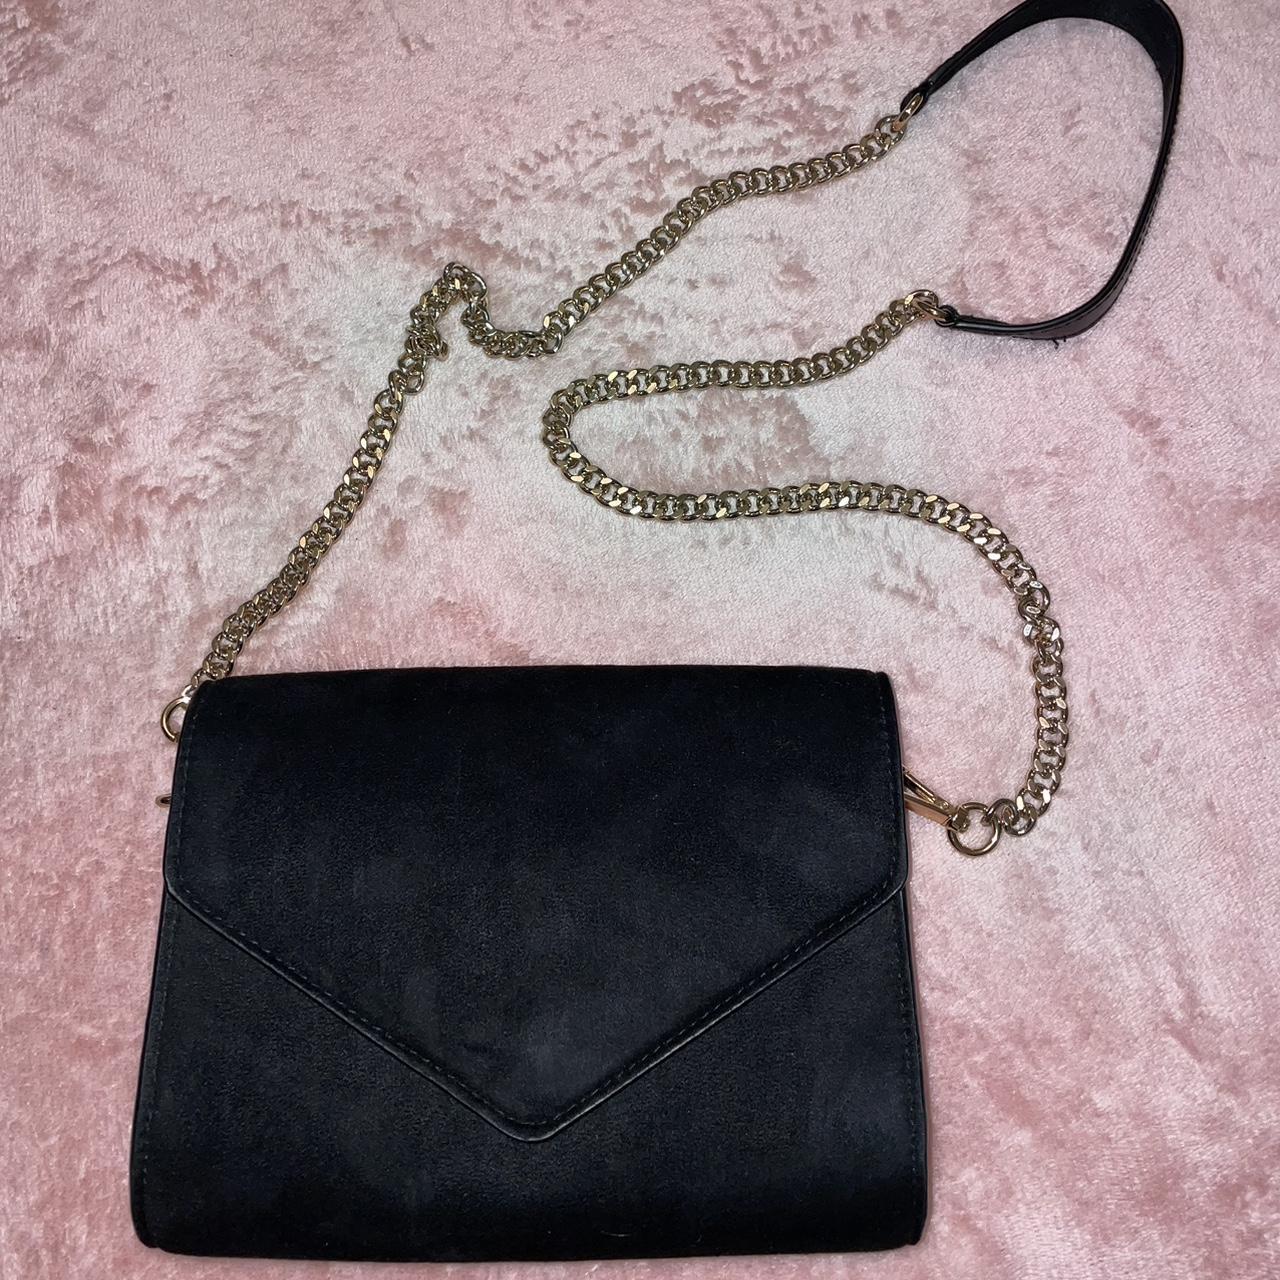 Used black and gold purse